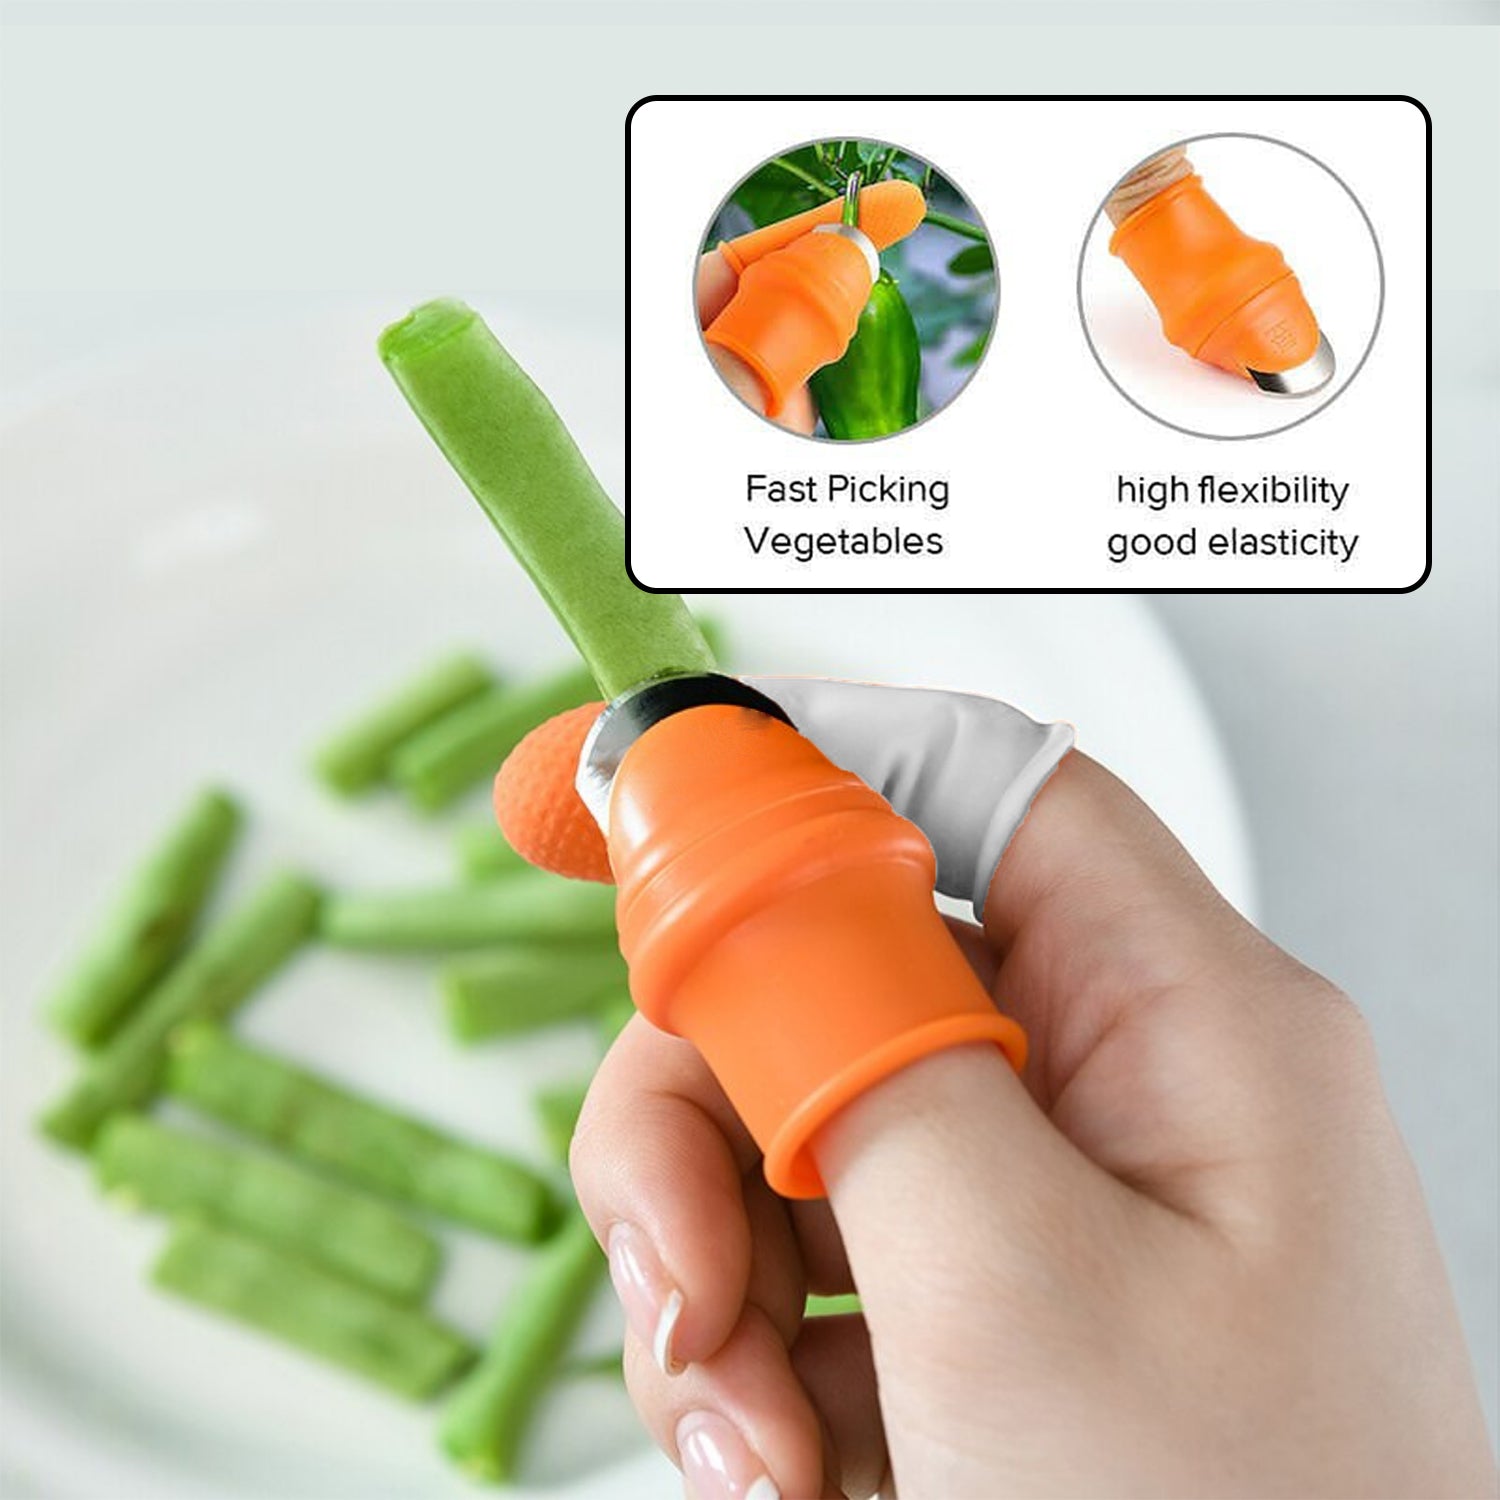 2662 Vegetable Thumb Cutter and tool with effective sharp cutting blade system.